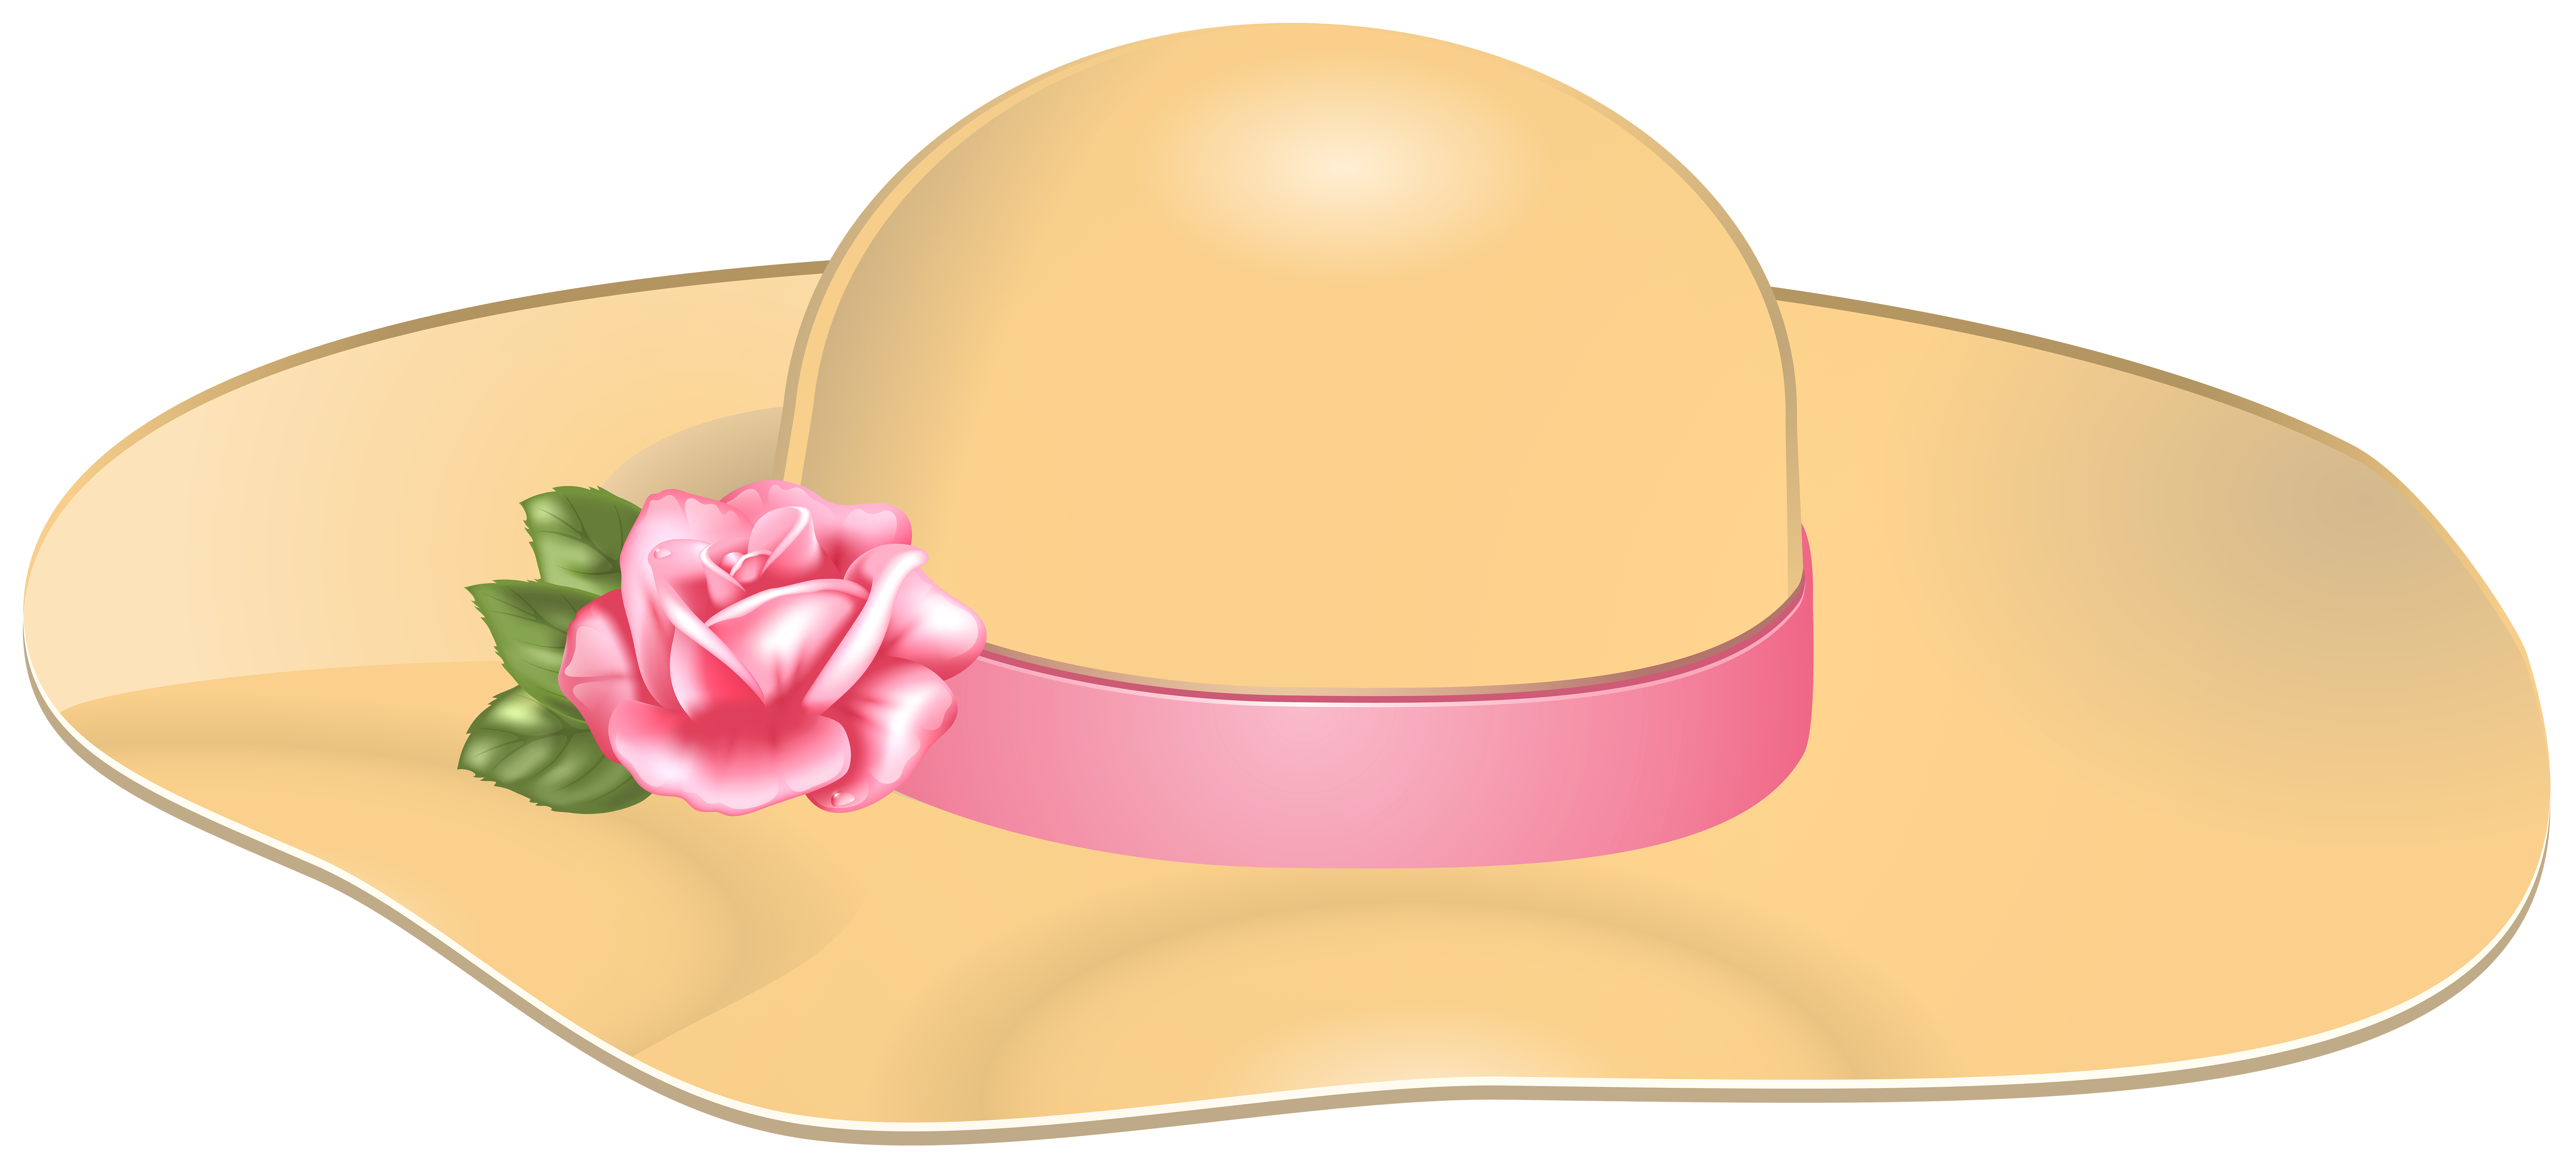 Female Hat with Rose Transparent PNG Clip Art Image.